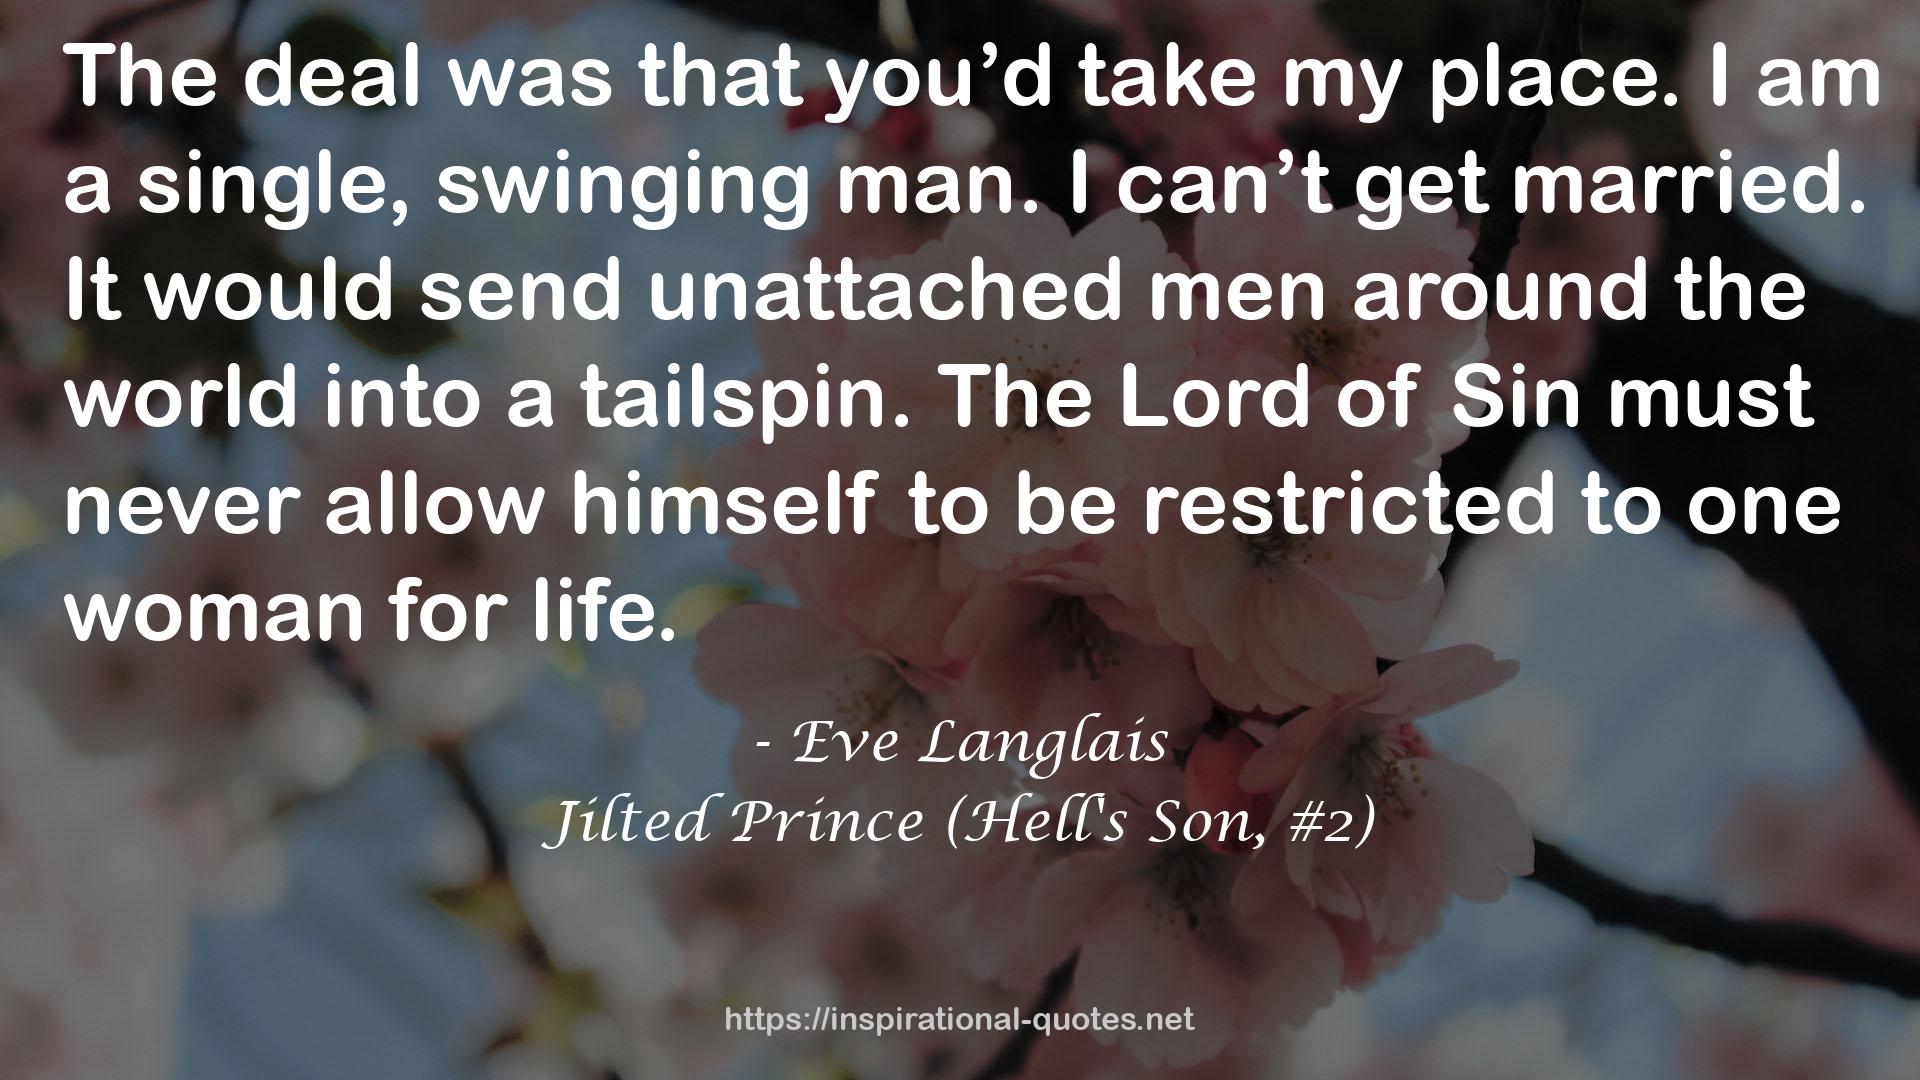 Jilted Prince (Hell's Son, #2) QUOTES